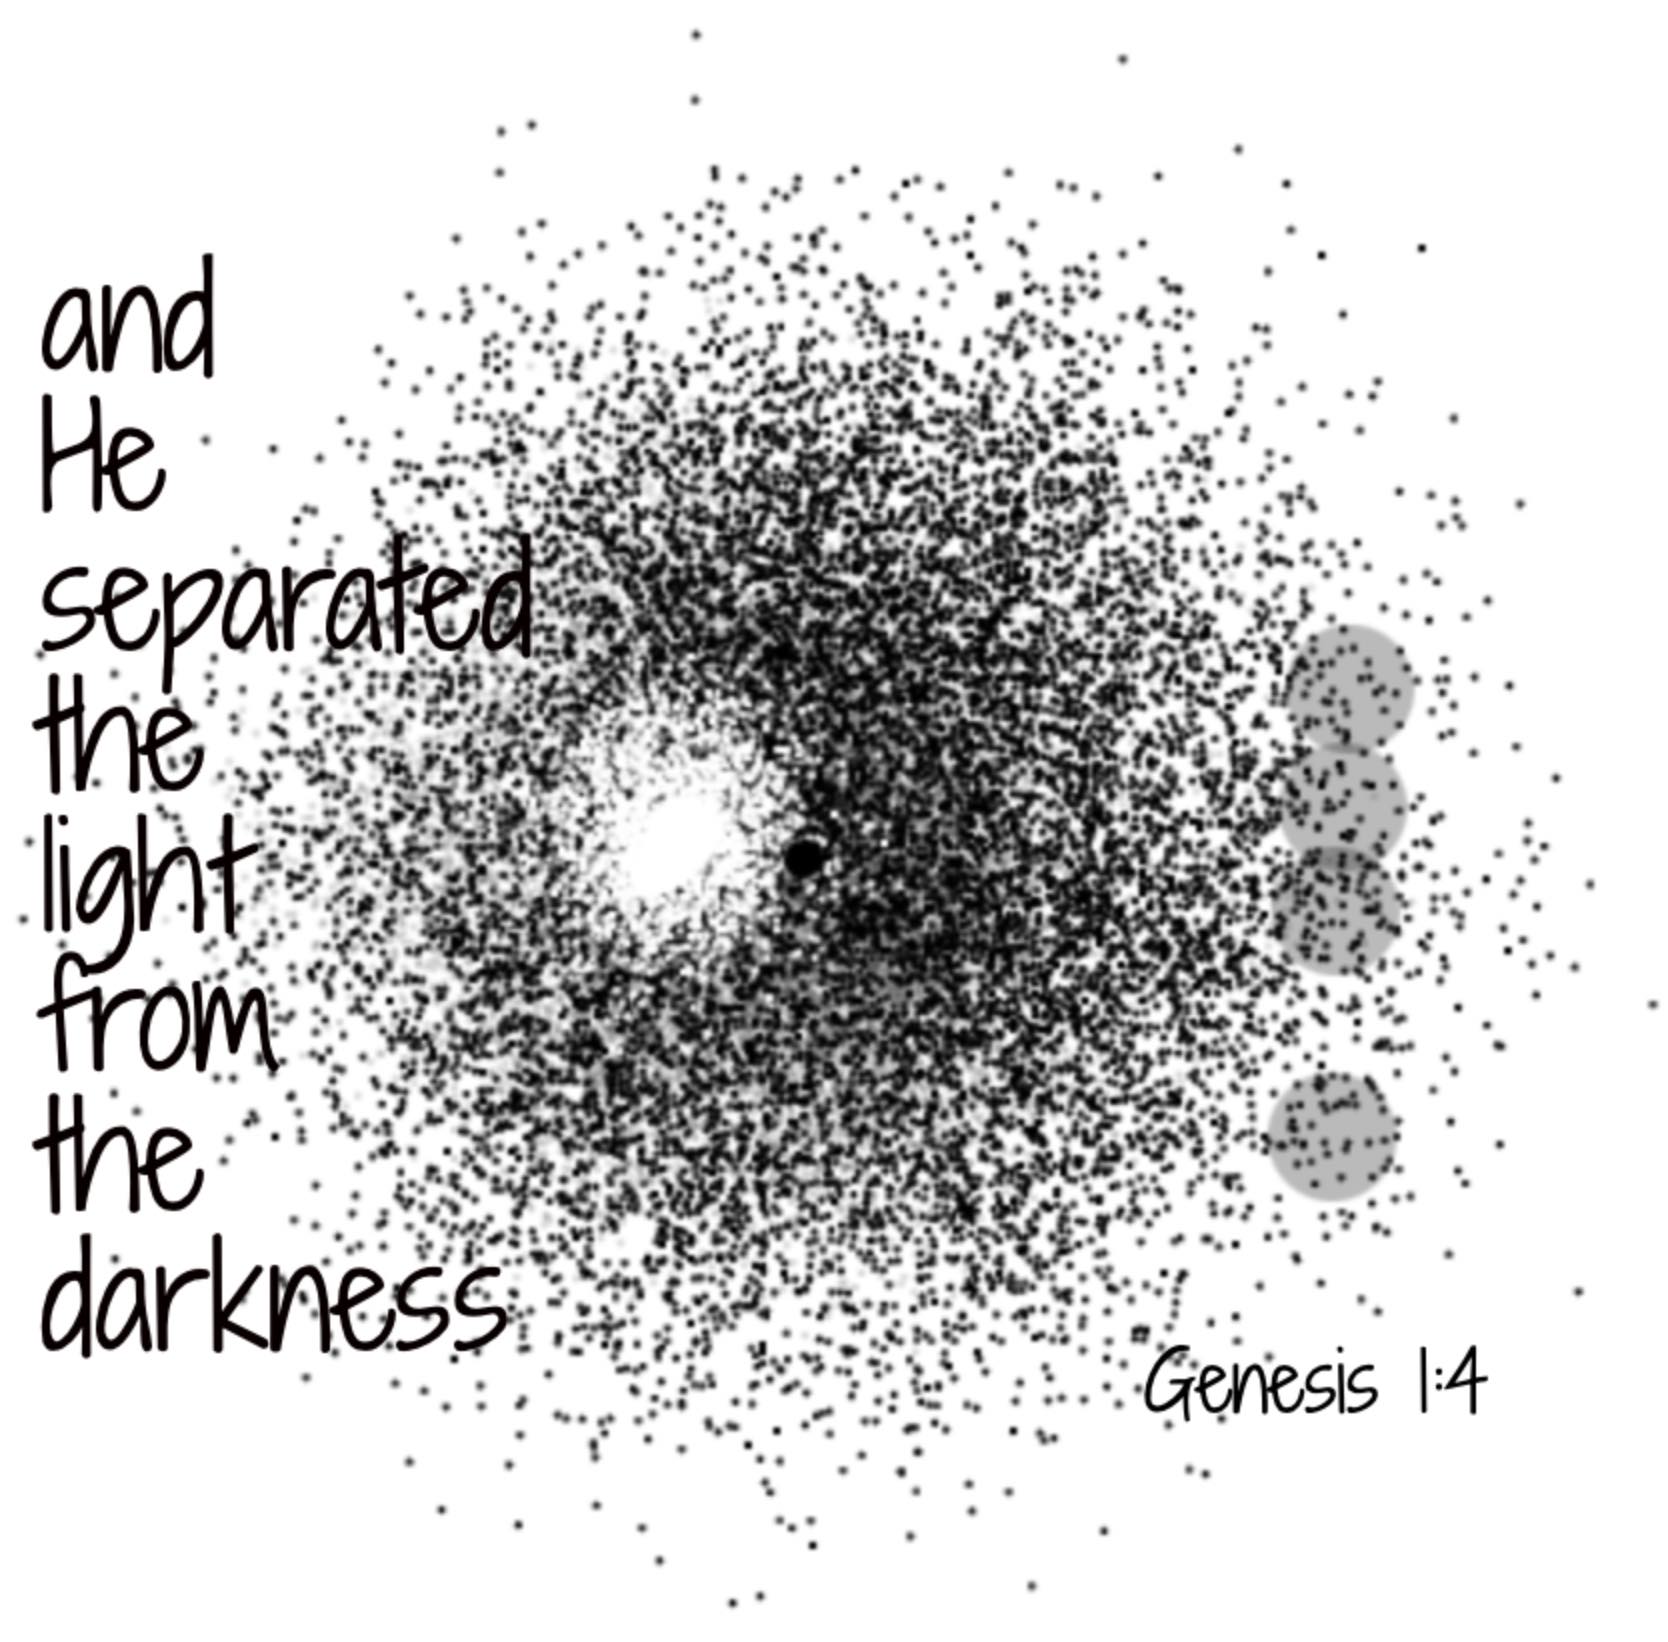 He separated light from darkness